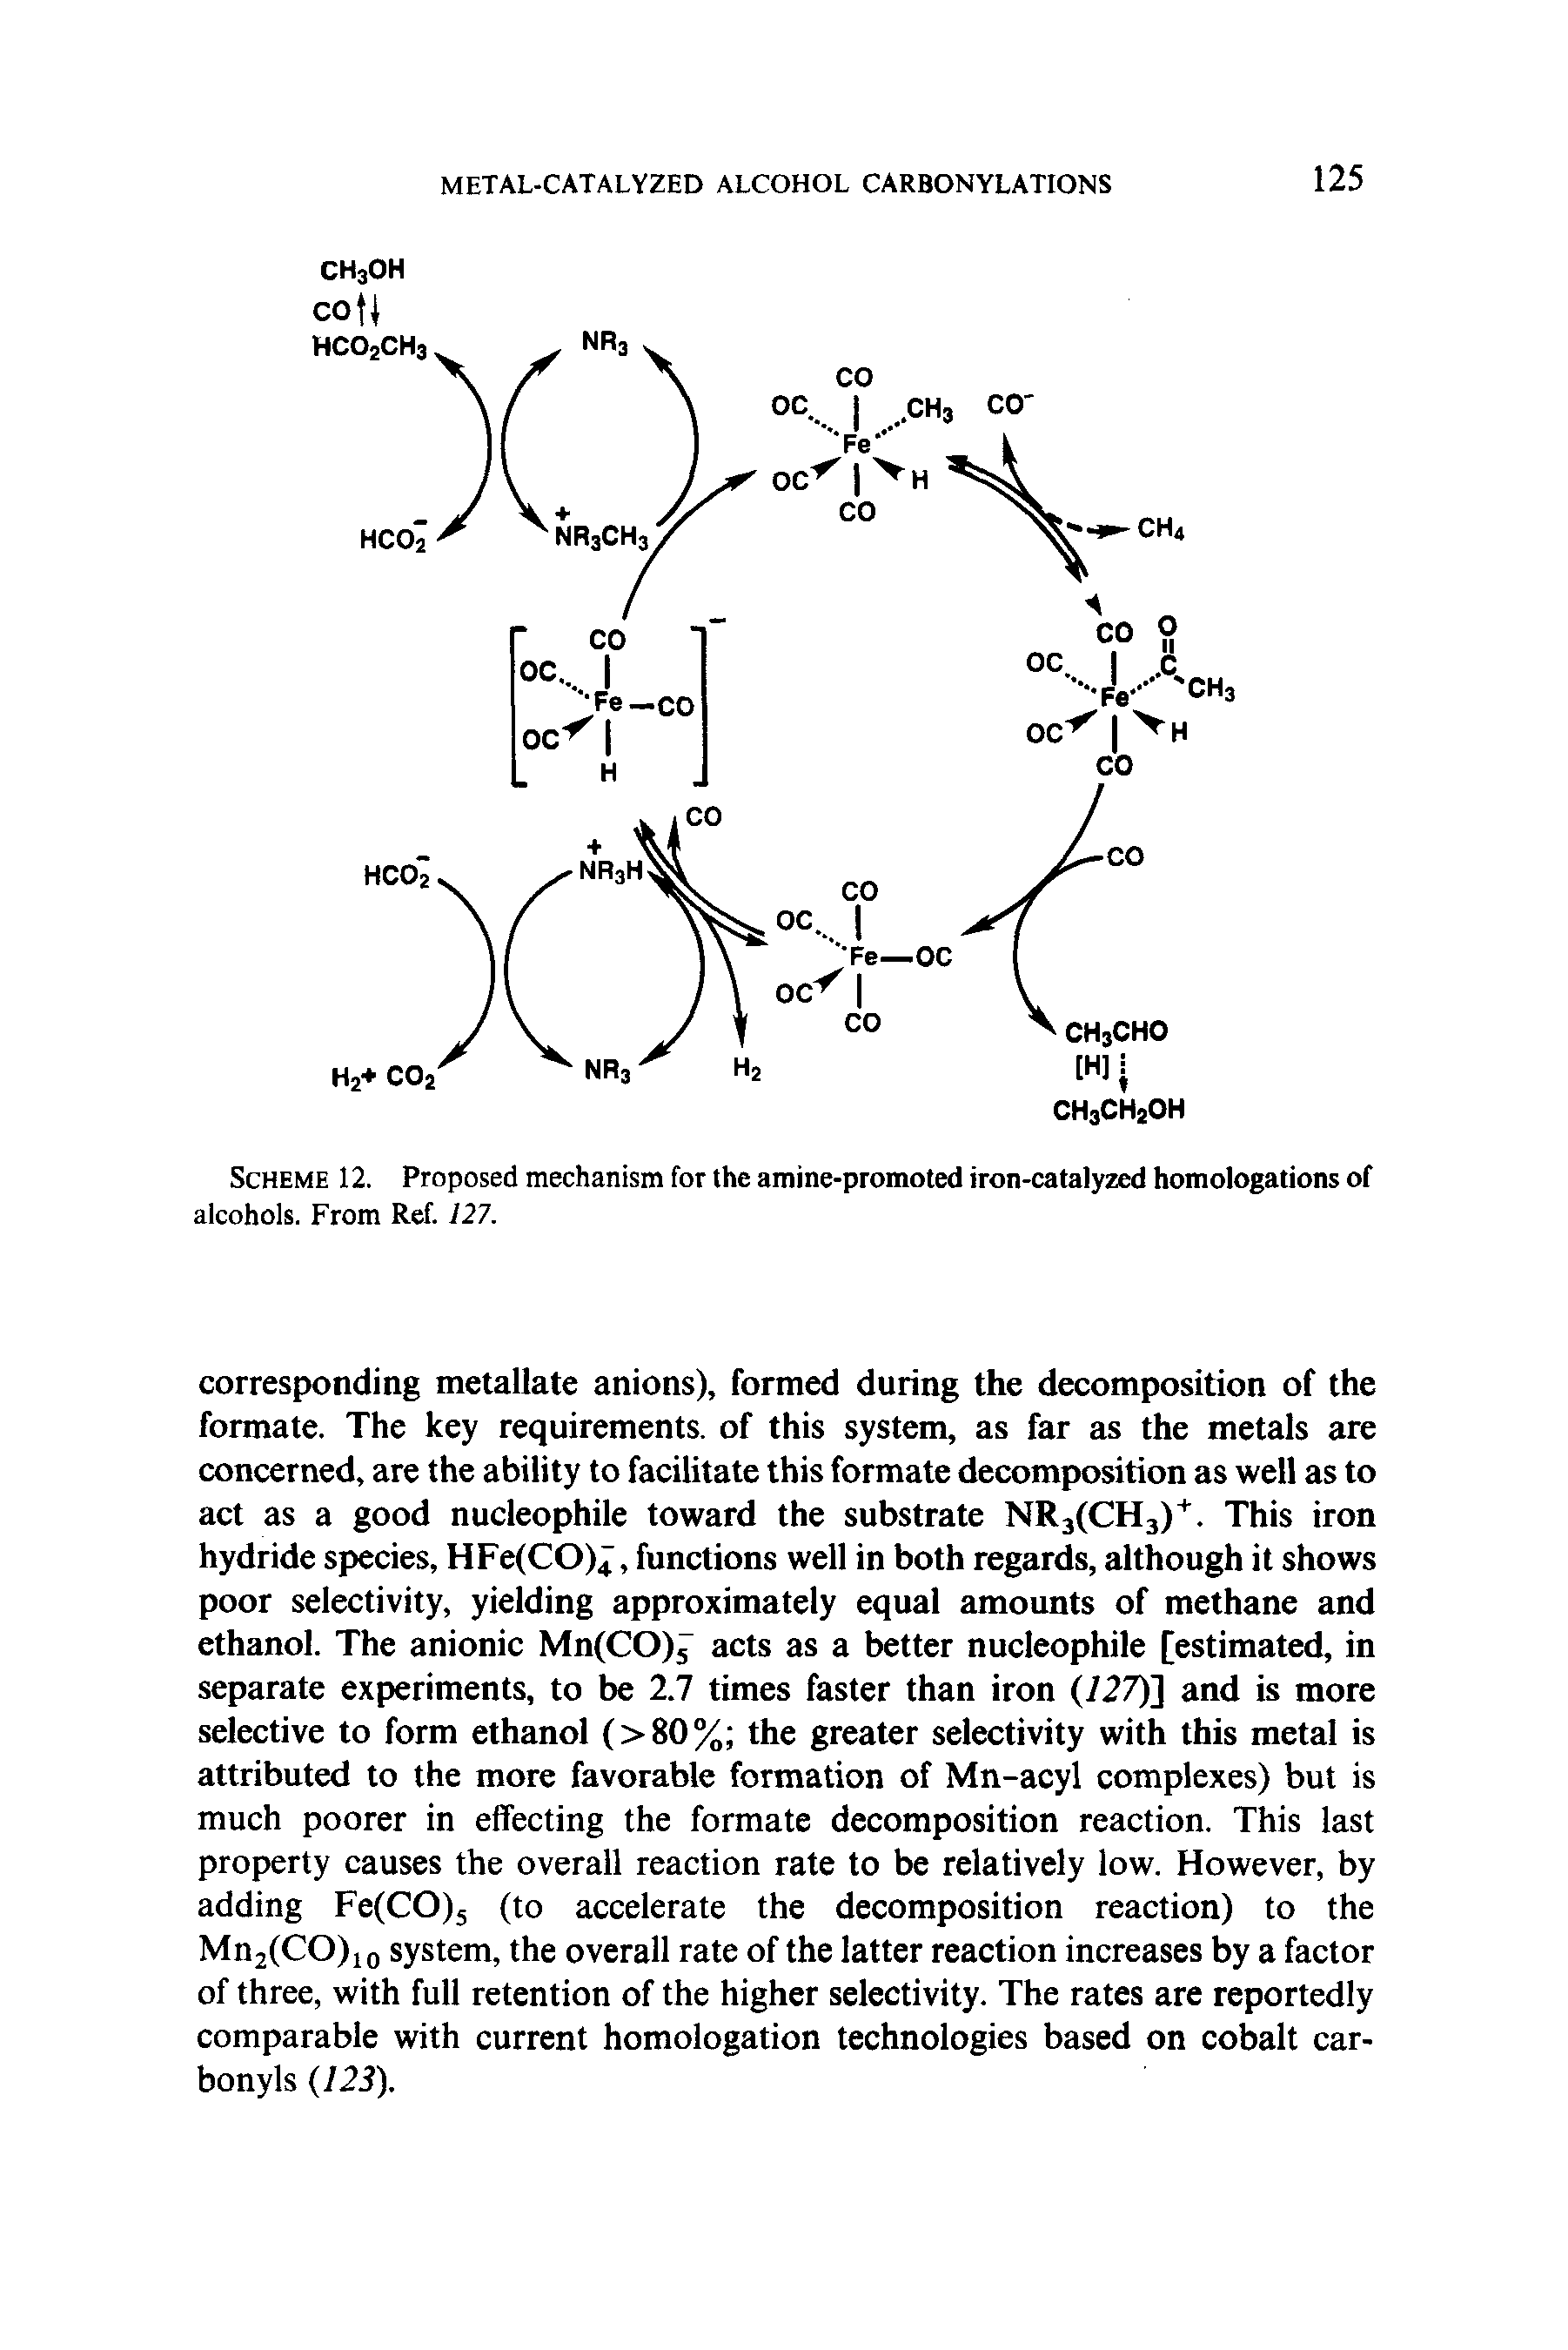 Scheme 12. Proposed mechanism for the amine-promoted iron-catalyzed homologations of alcohols. From Ref. 127.